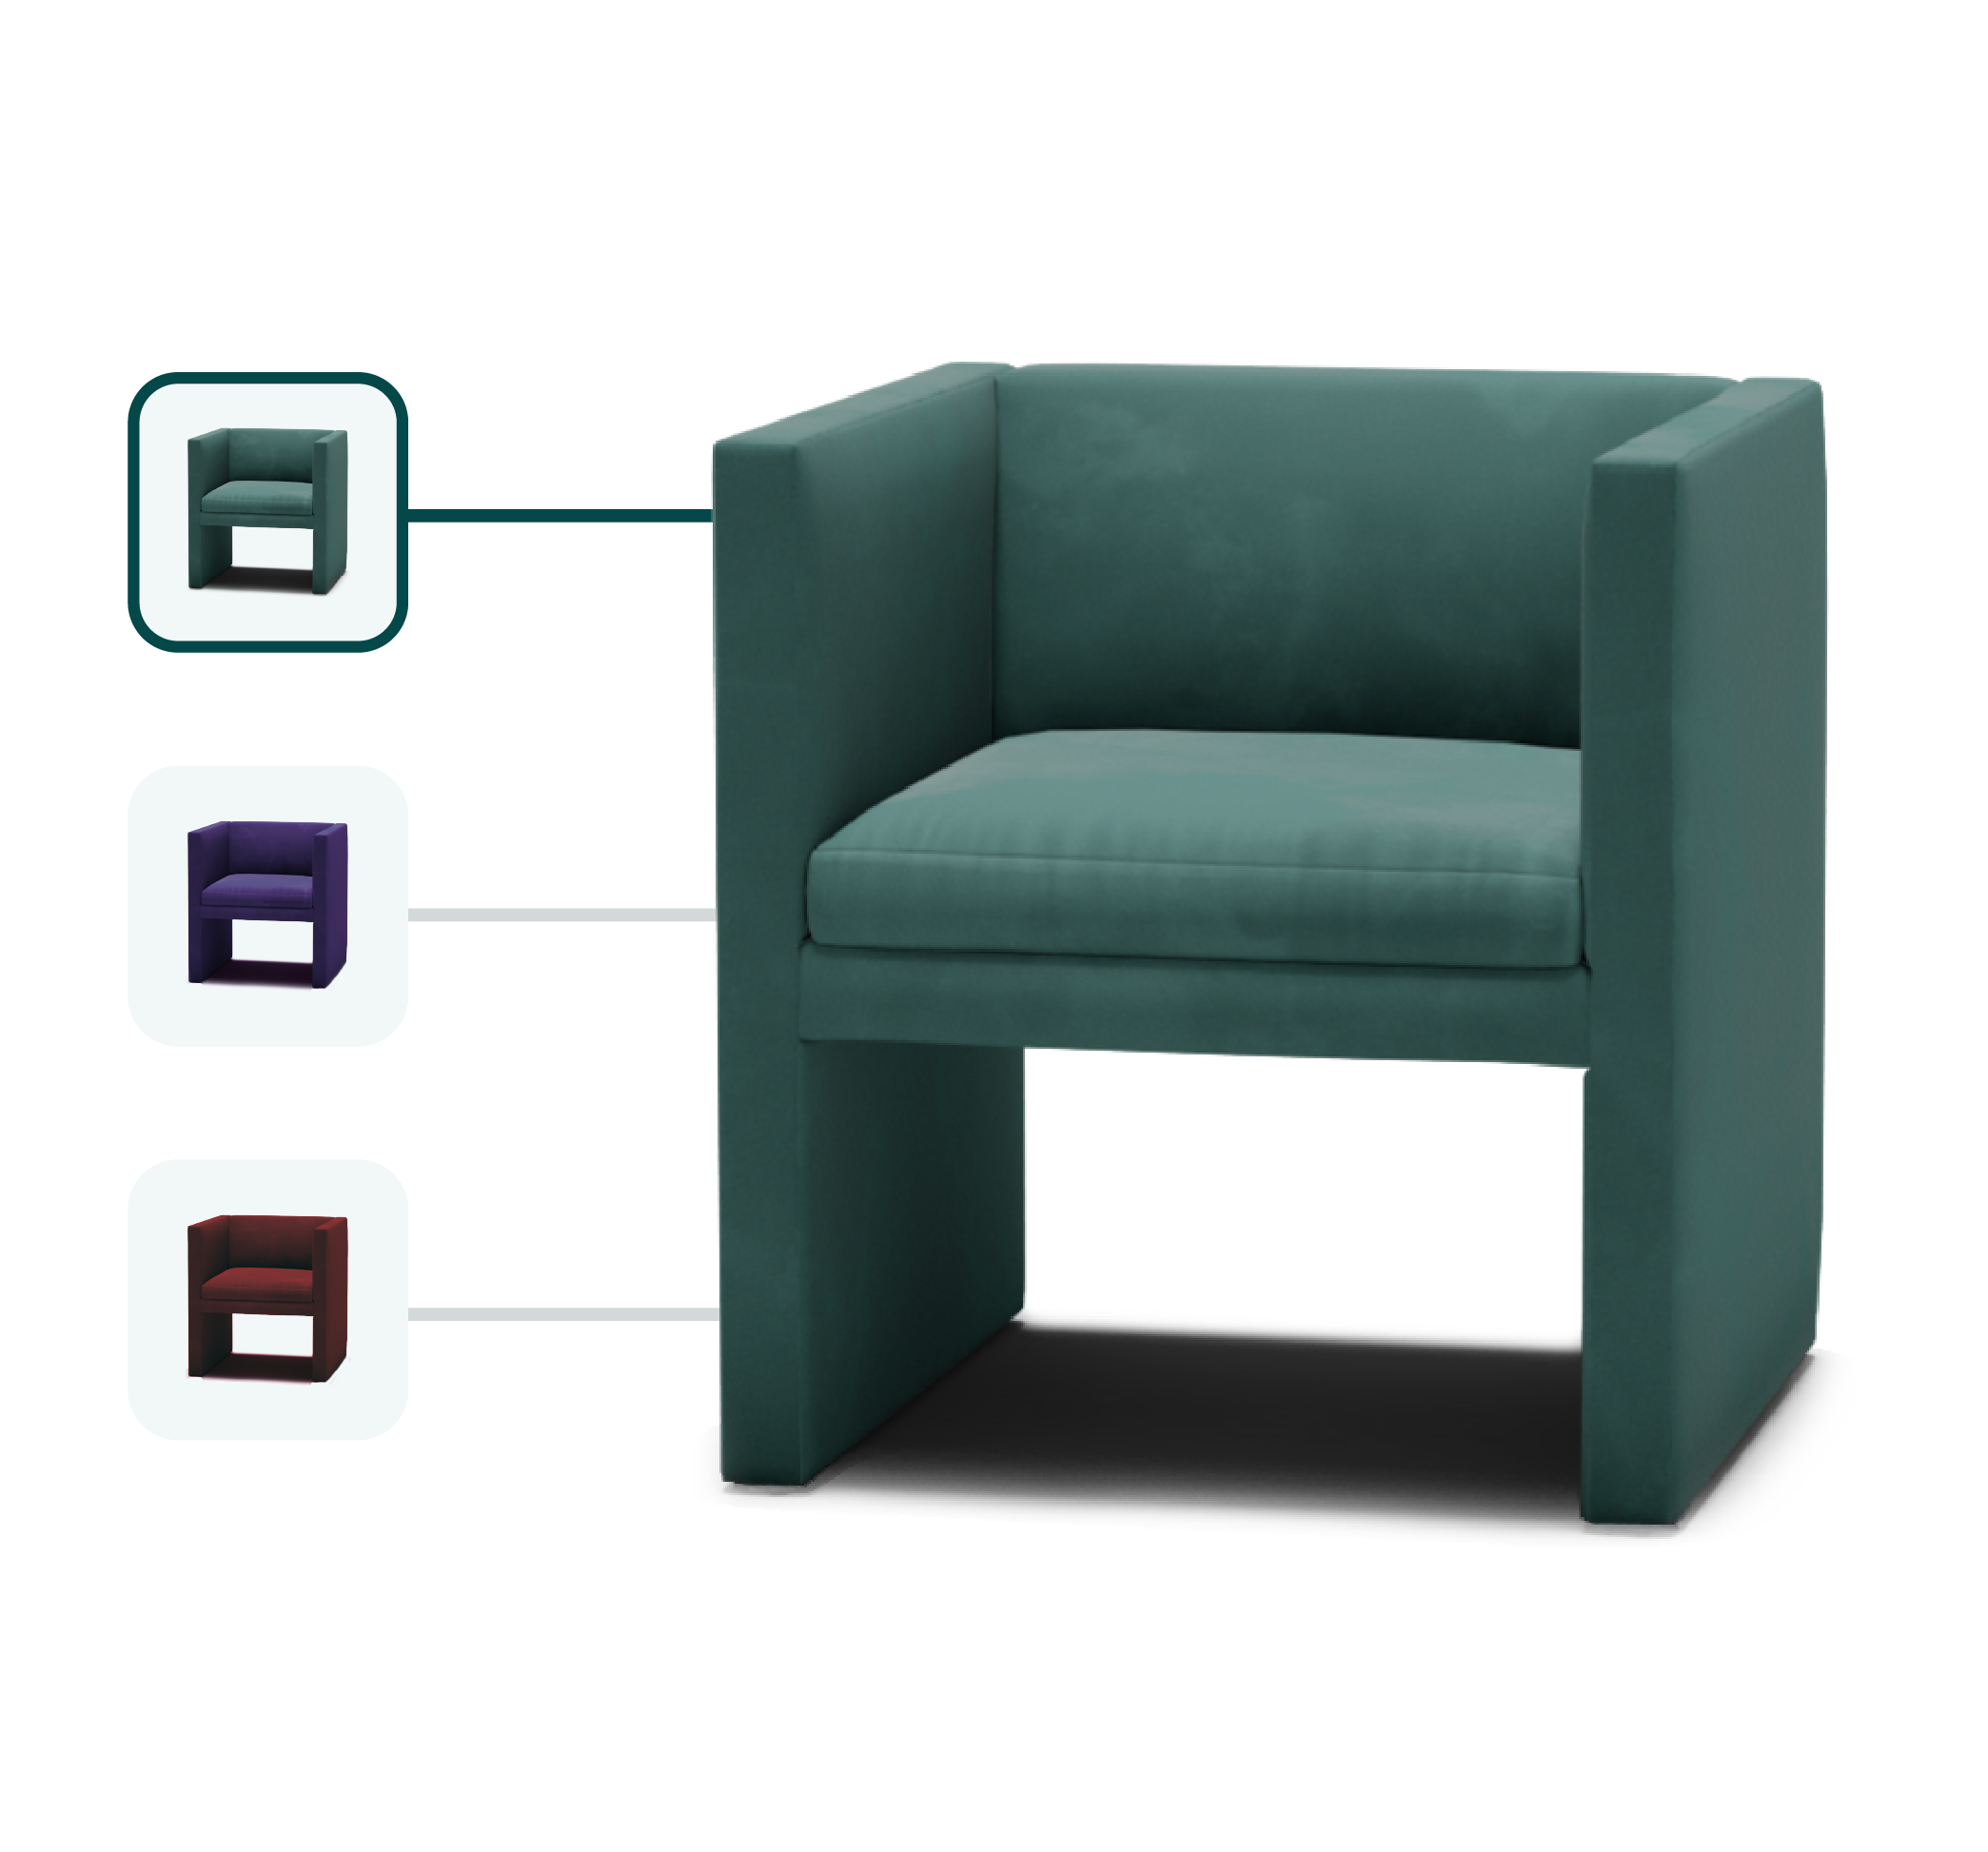 high-quality image of a customizable chair